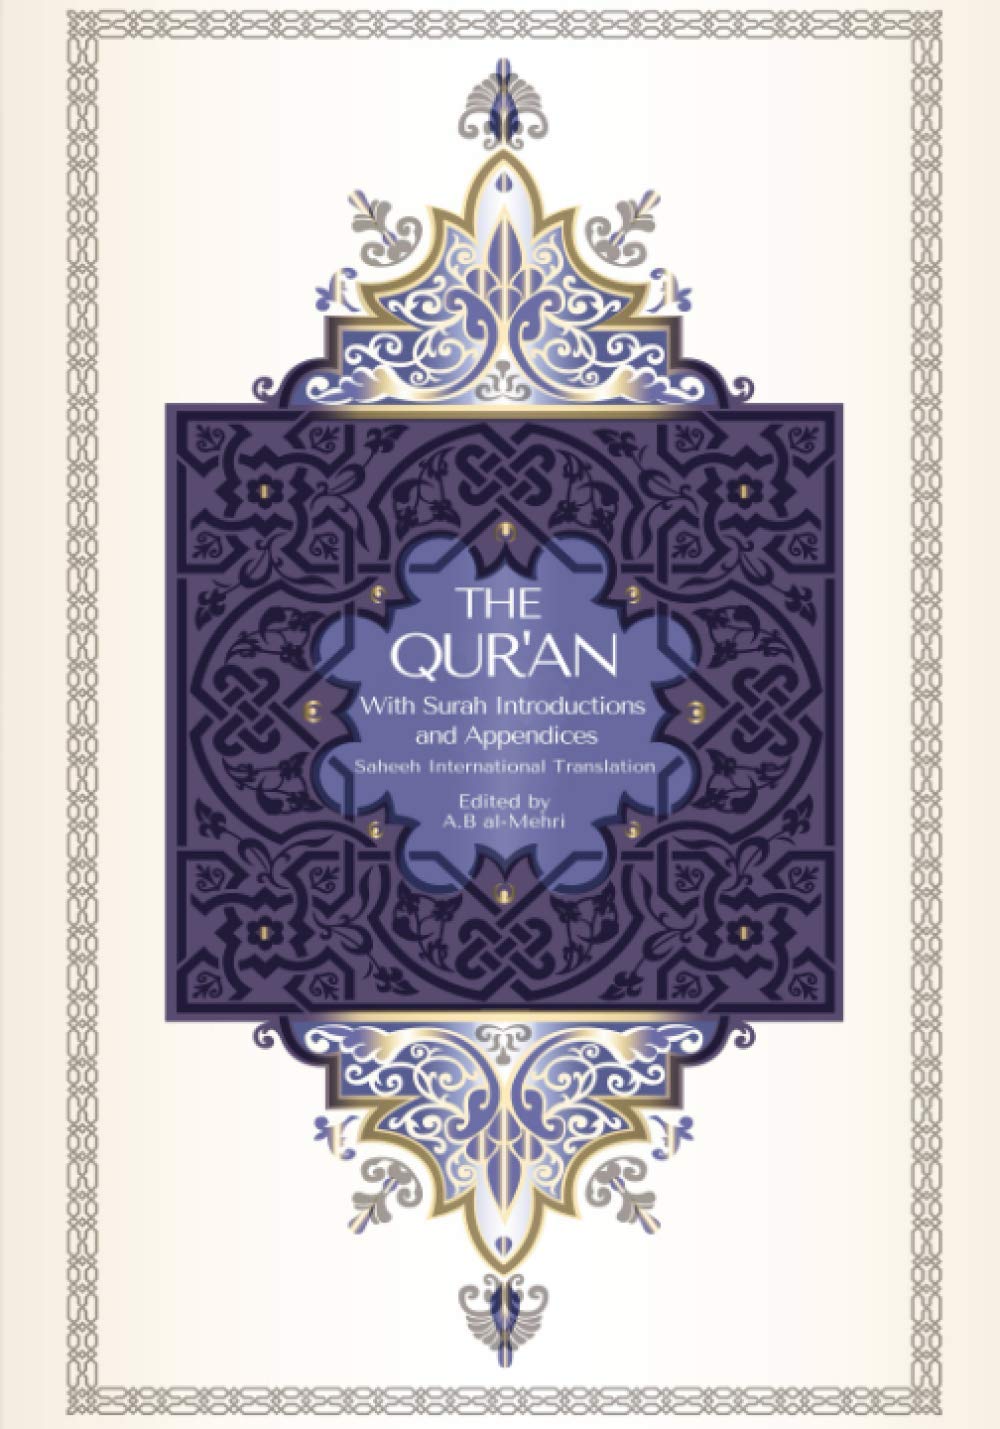 The Quran With Surah Introductions and Appendices (Saheeh International Translation)